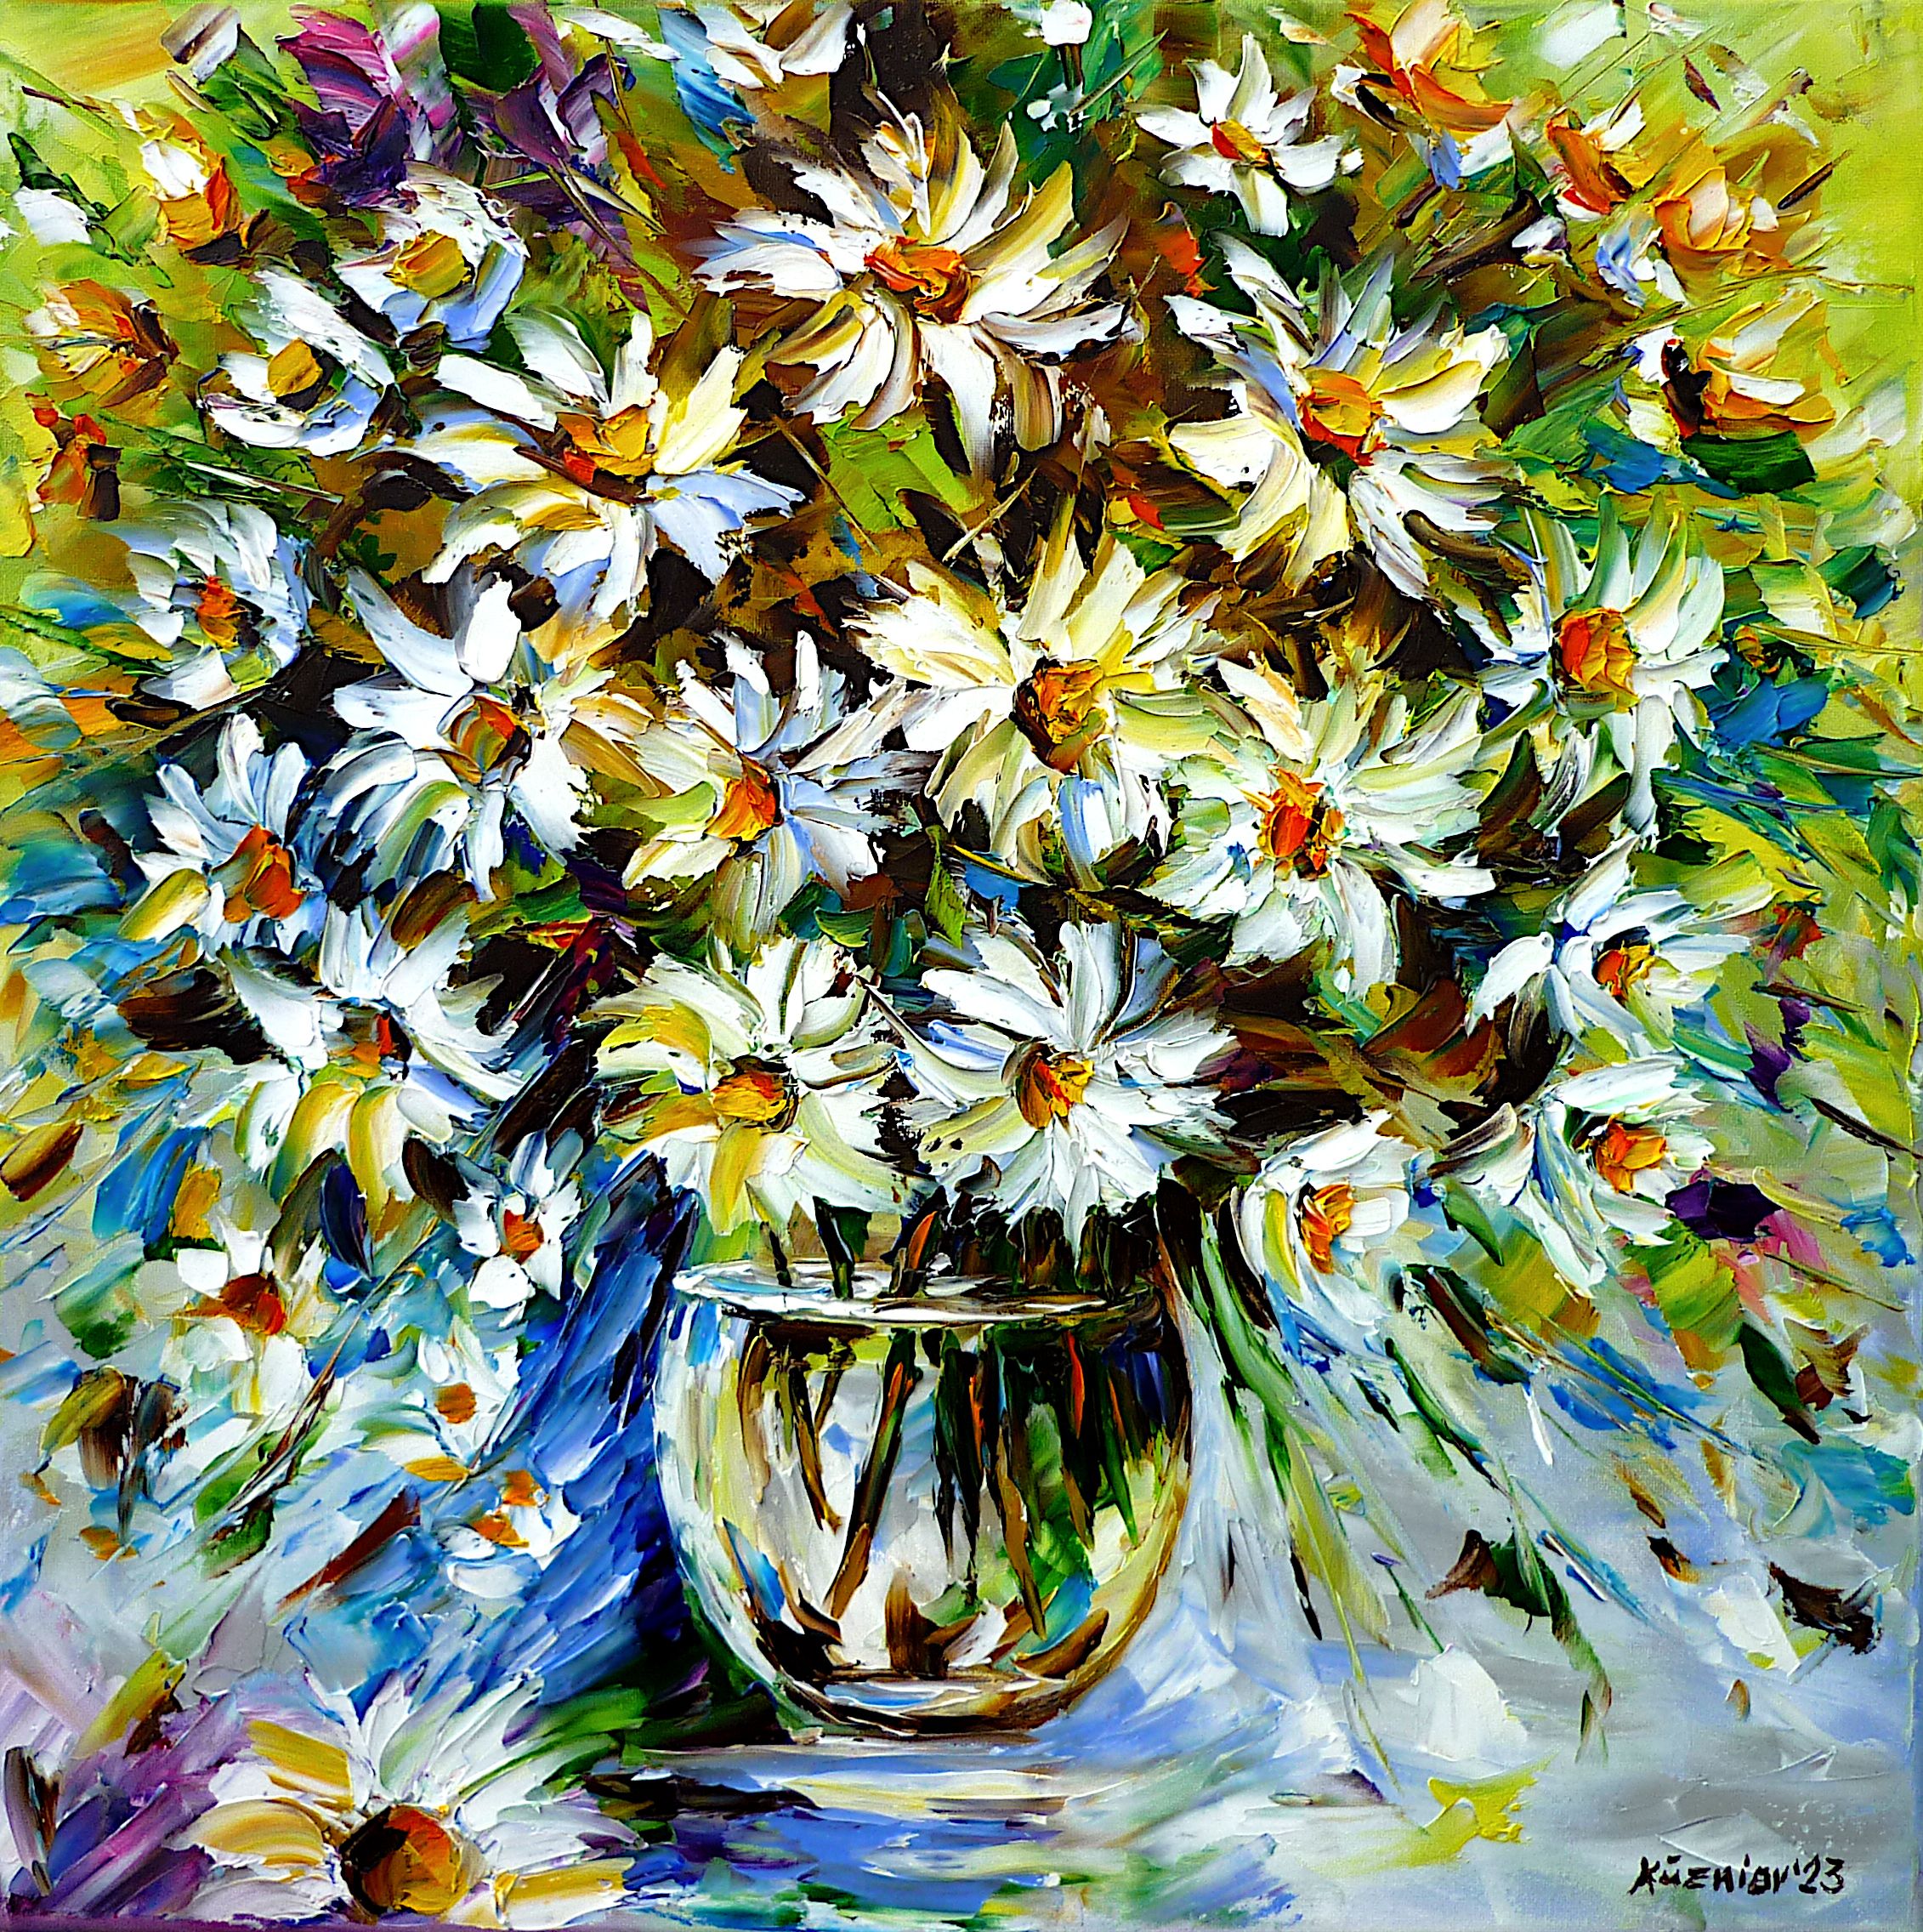 flowers in vase,field flowers in vase,wild flowers in vase,white flowers,floral still life,flower bouquet,sunday flowers,lucky flowers,garden flowers,vibrant bouquet,vibrant flowers,spring flowers,summer flowers,spring bouquet,summer bouquet,spring colors,summer colors,happiness,happiness flowers,flowers abstract,flower beauty,flower love,flower picture,flower painting,flower art,bright picture,bright painting,dining room picture,flower lovers,i love flowers,square painting,square format,square picture,palette knife oil painting,modern art,figurative art,figurative painting,contemporary painting,abstract painting,lively colors,colorful painting,bright colors,impasto painting